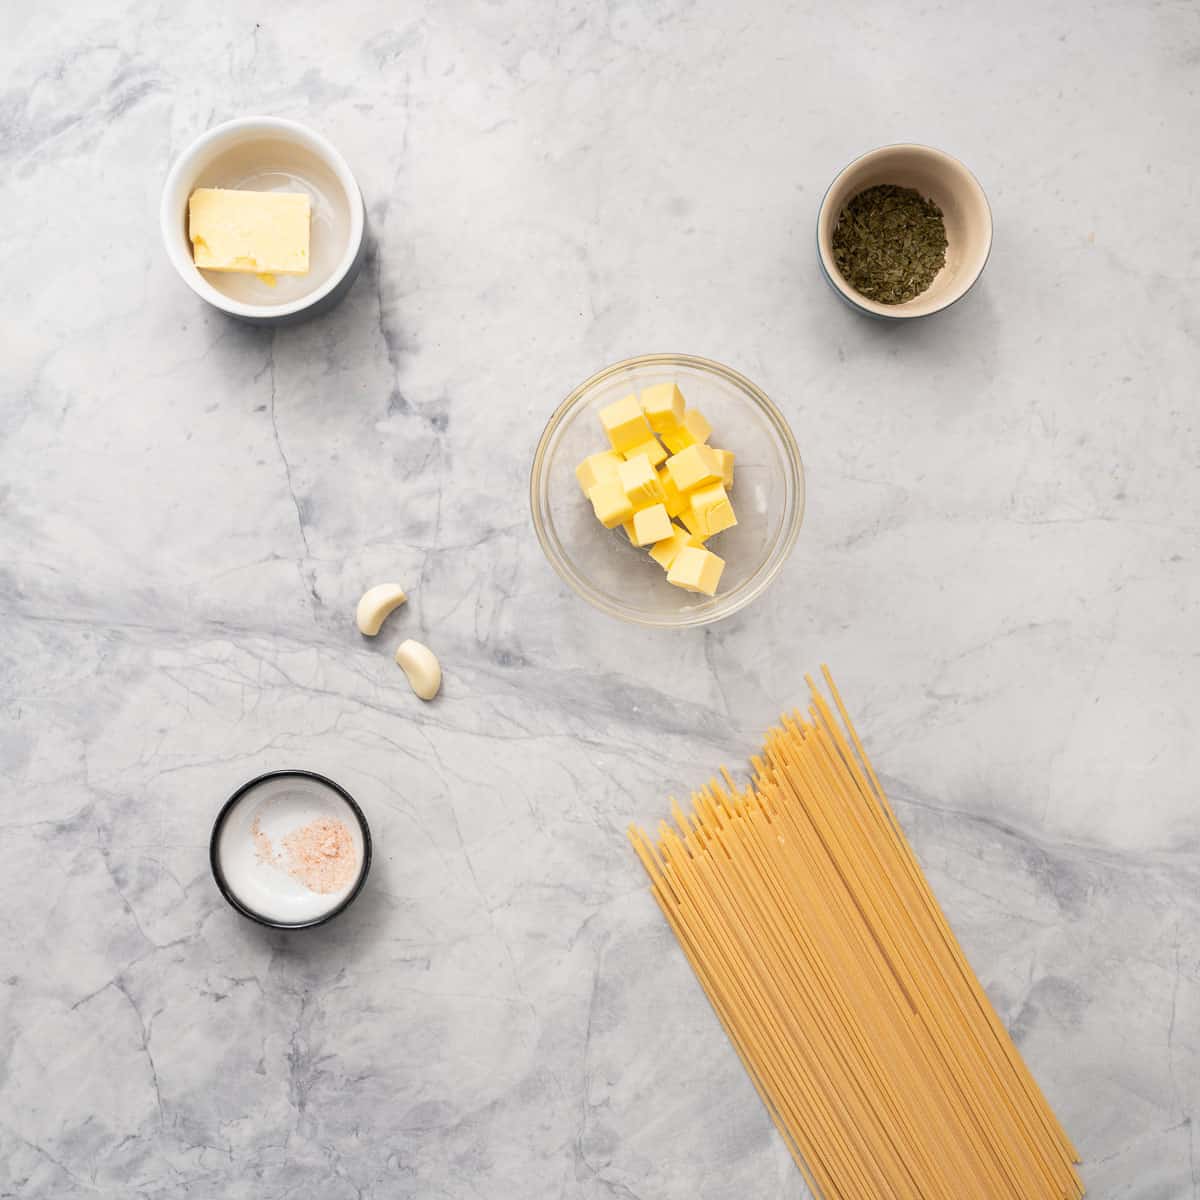 All the ingredients to make the buttered noodles resting on the bench 